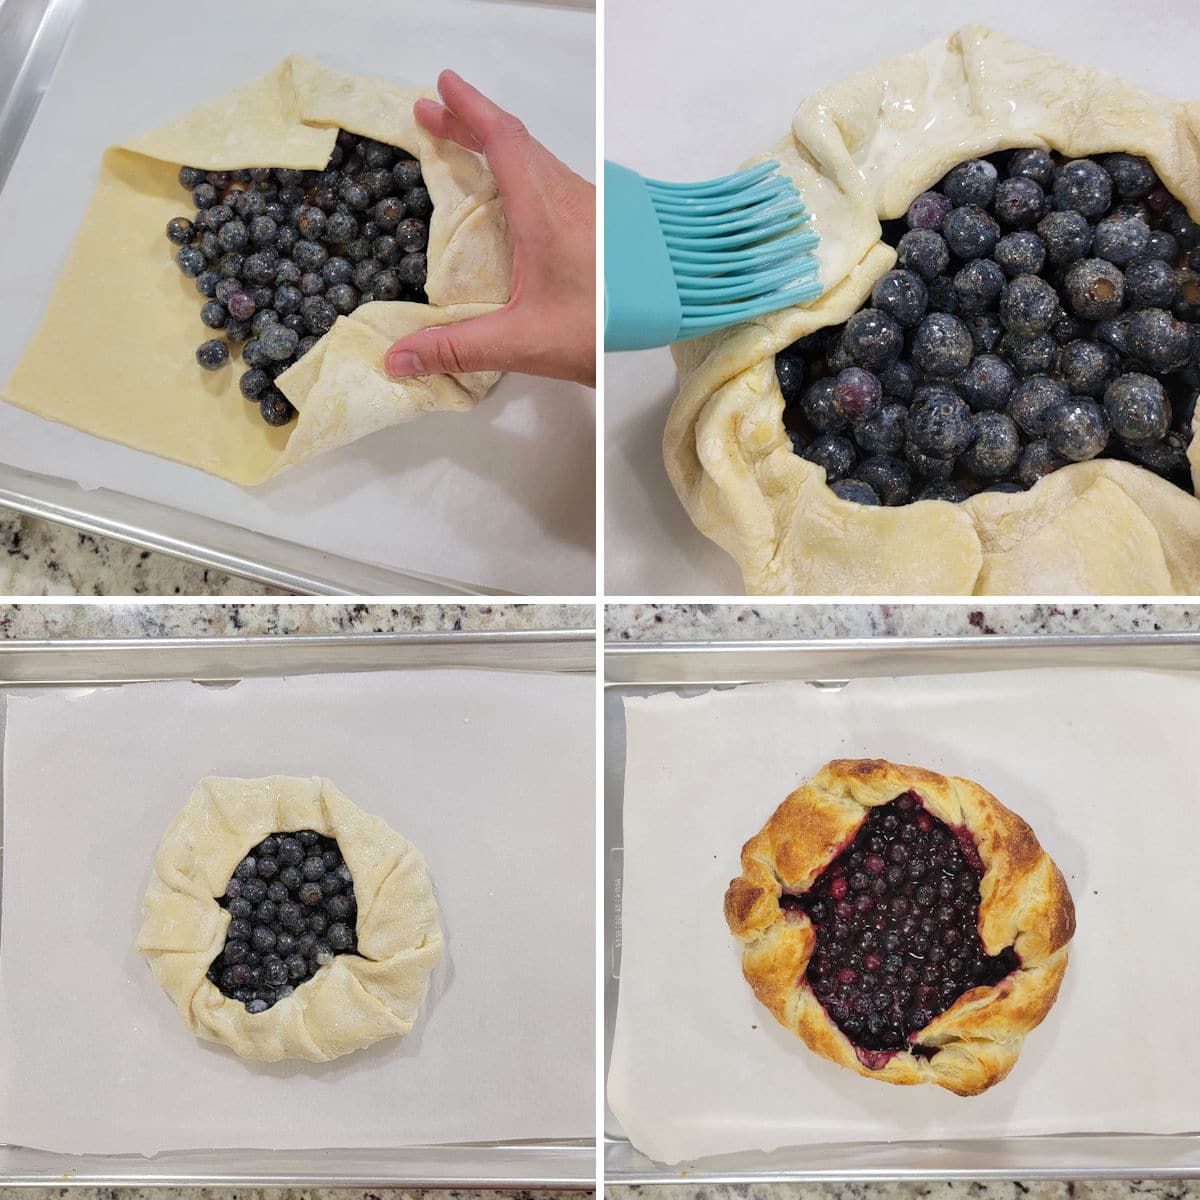 Assembling and baking a blueberry galette.